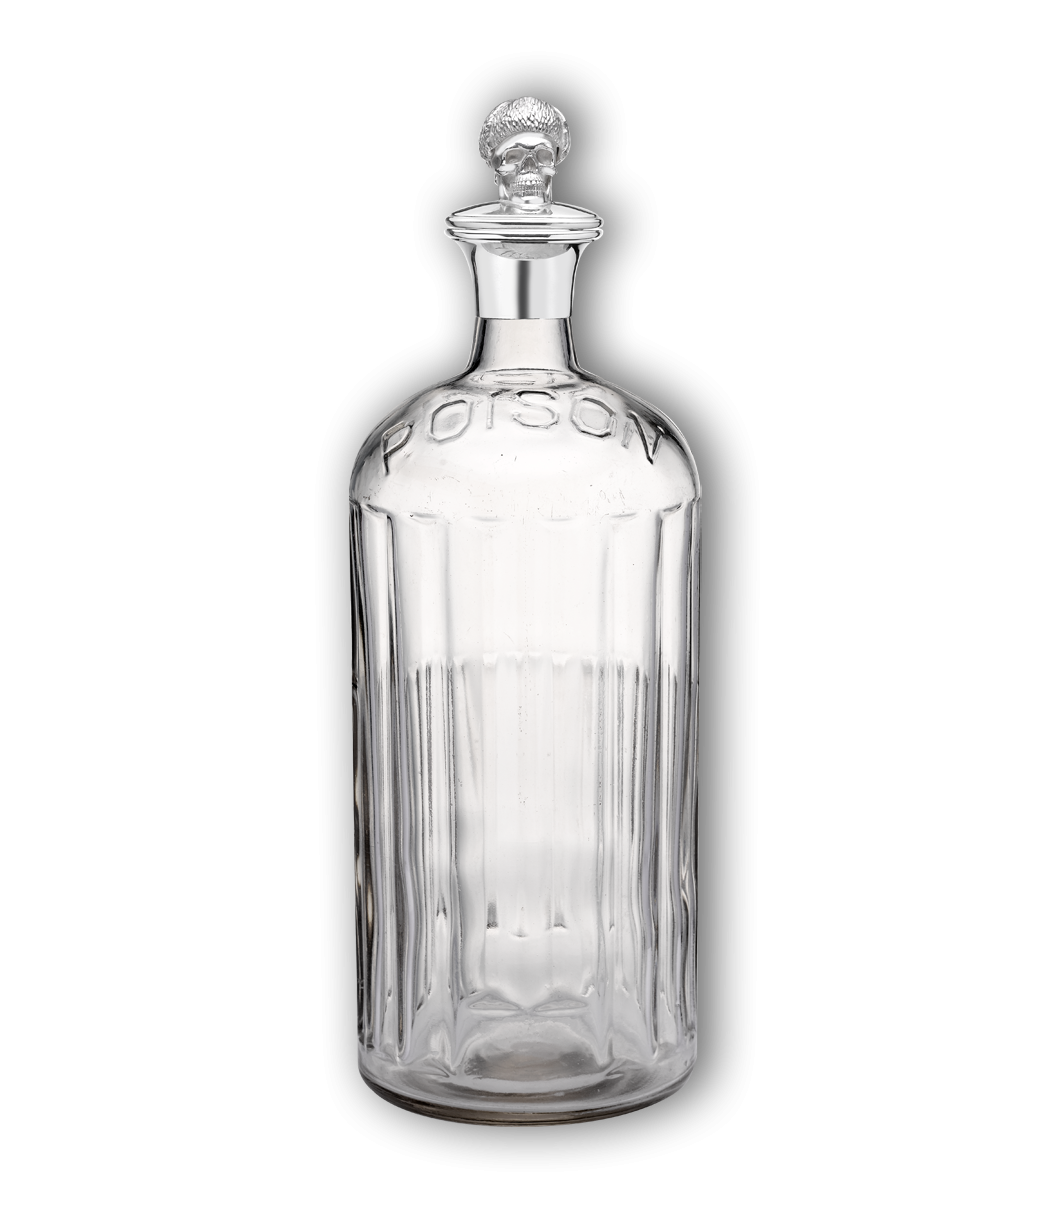 Images free download image. Glass bottle png